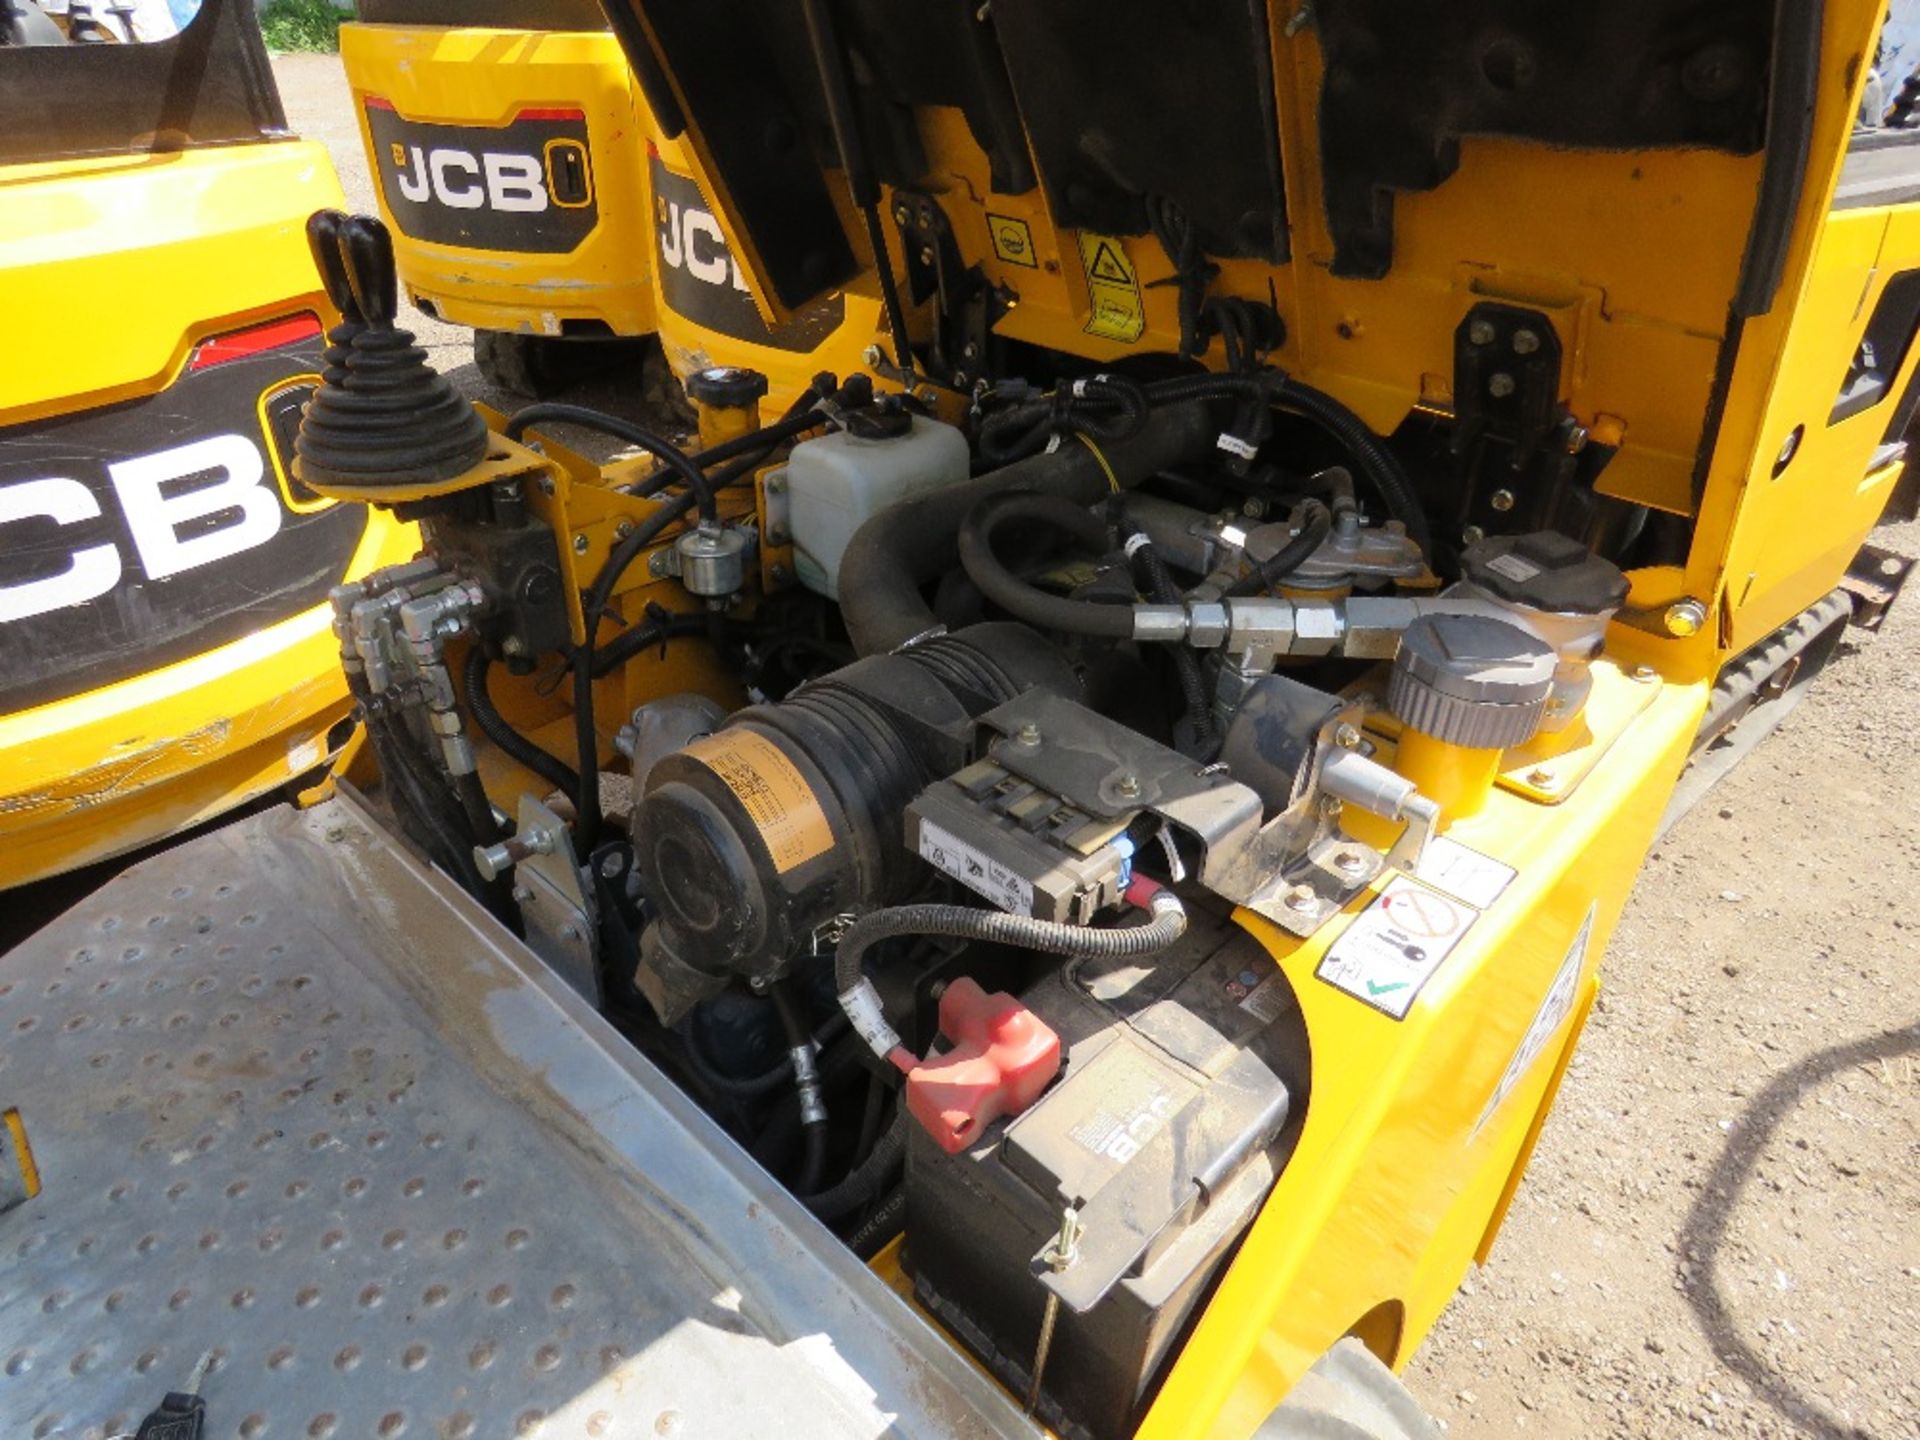 JCB 1T-1 HIGH TIP ONE TONNE DUMPER, YEAR 2018 BUILD. 112.2 RECORDED HOURS, KEY AND CERTIFICATE OF - Image 9 of 13